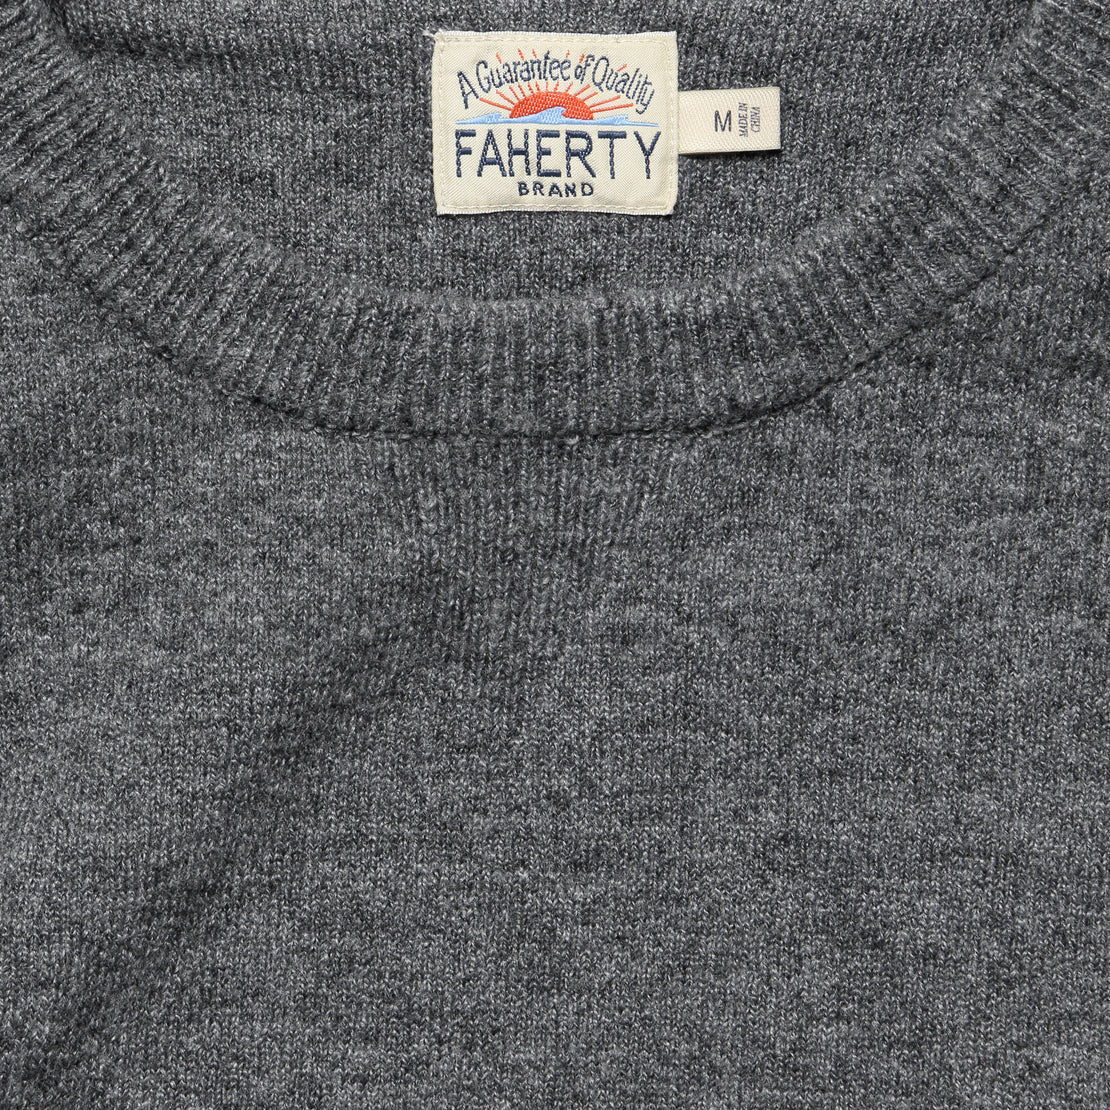 Jackson Crew Sweater - Grey Heather - Faherty - STAG Provisions - Tops - Sweater